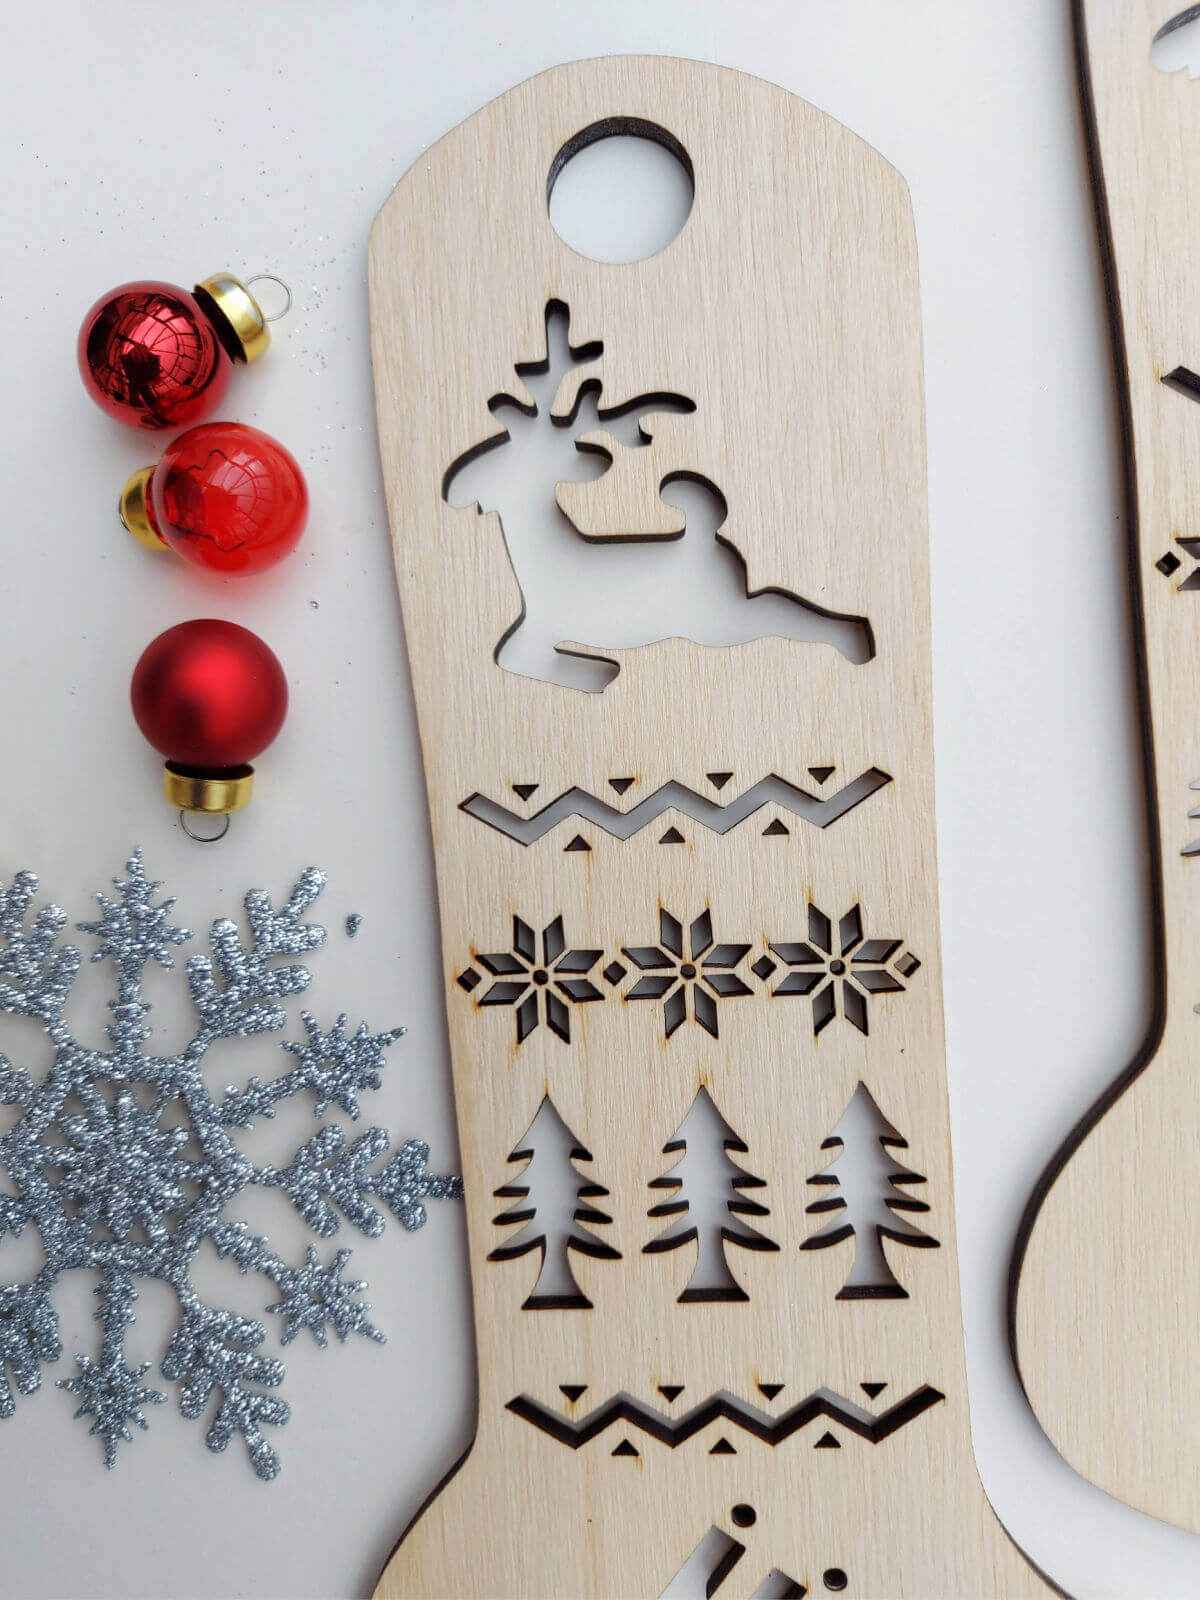 A close up of the leg section of a wooden sock blocker. At the top is a cutout of a reindeer with festive shapes and Christmas trees underneath.